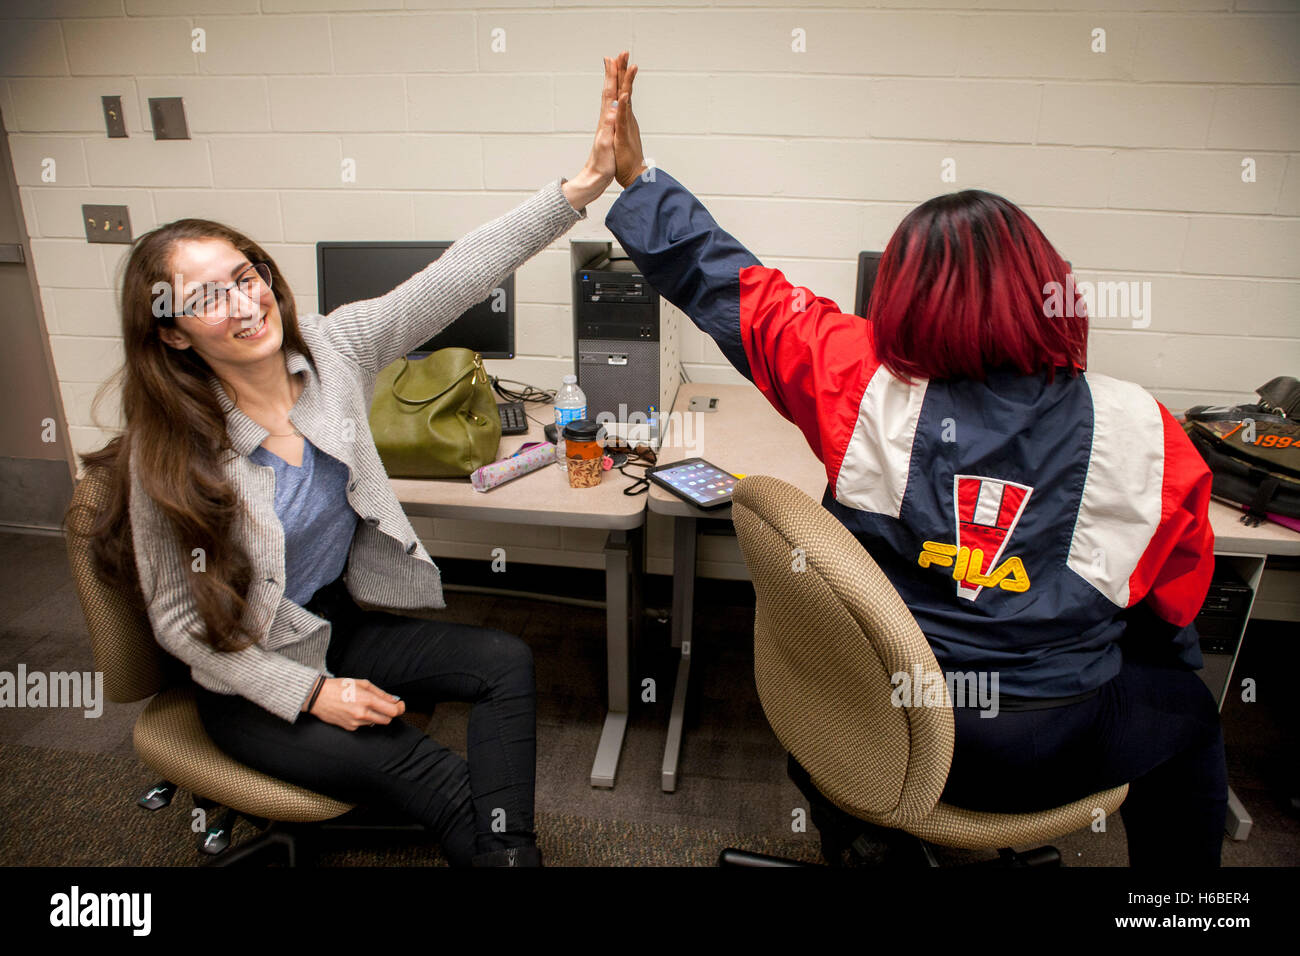 A Caucasian tutor in the learning center of a Santa Ana, CA, community college 'high fives' her happy Hispanic student in congratulation for her successful work. Note red dyed hair. Stock Photo